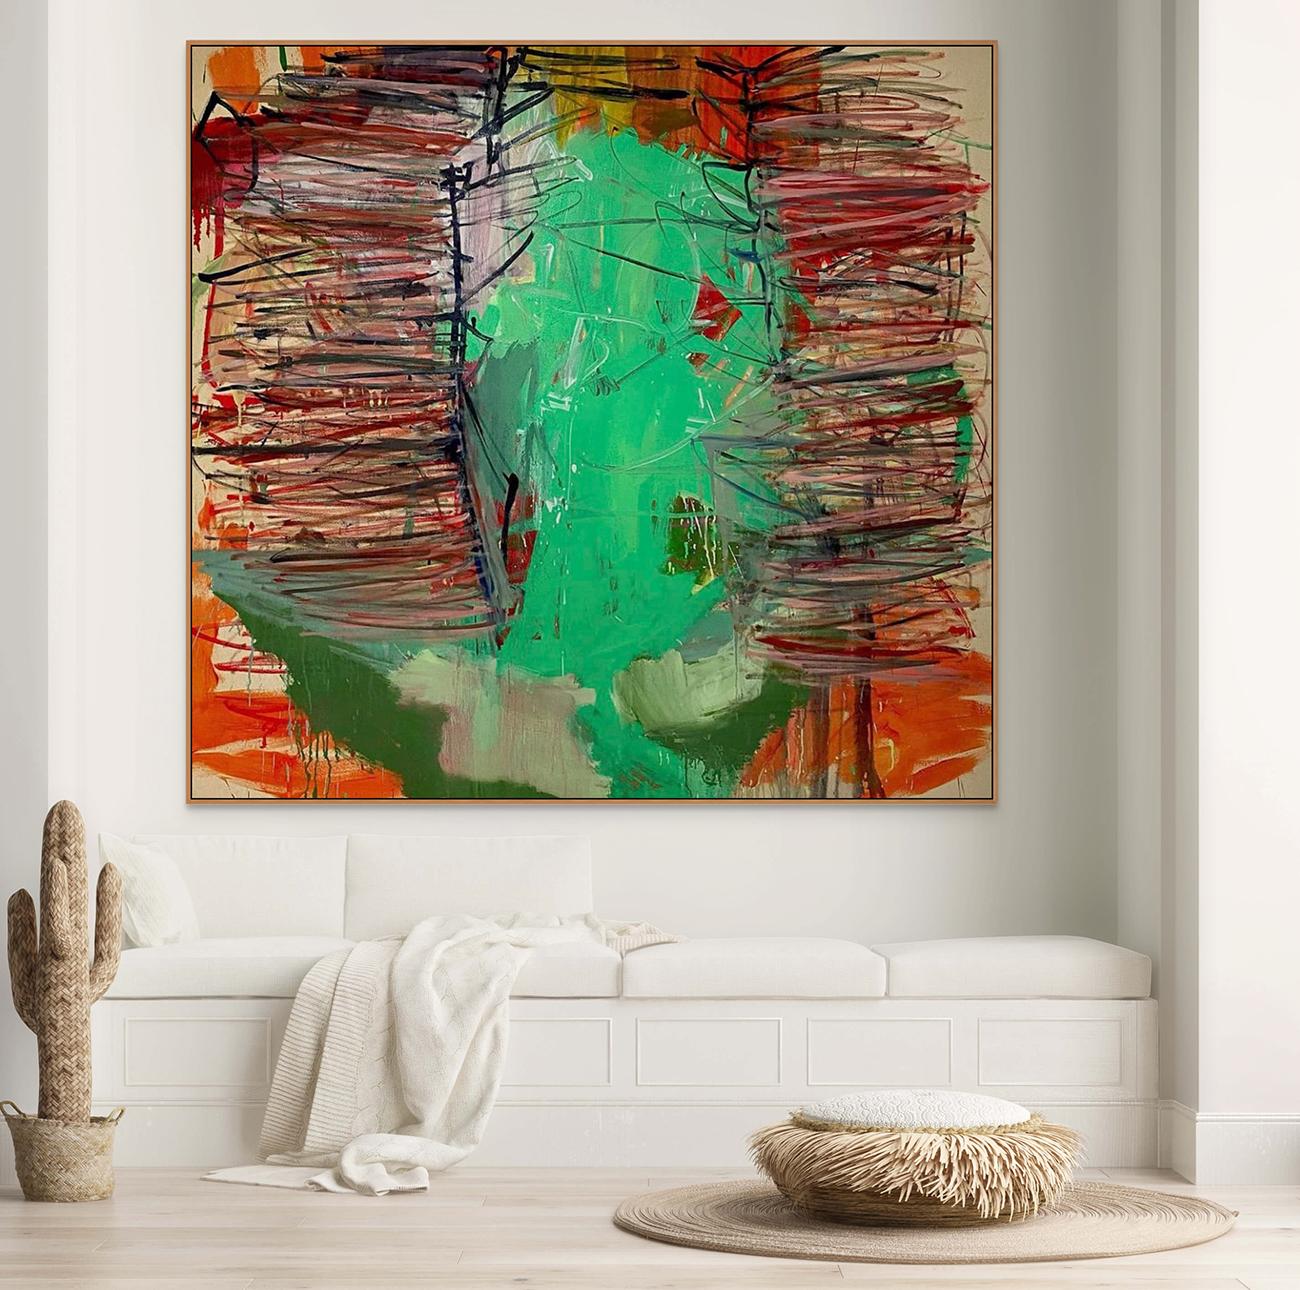 Flank (Abstract painting) - Painting by Karl Bielik